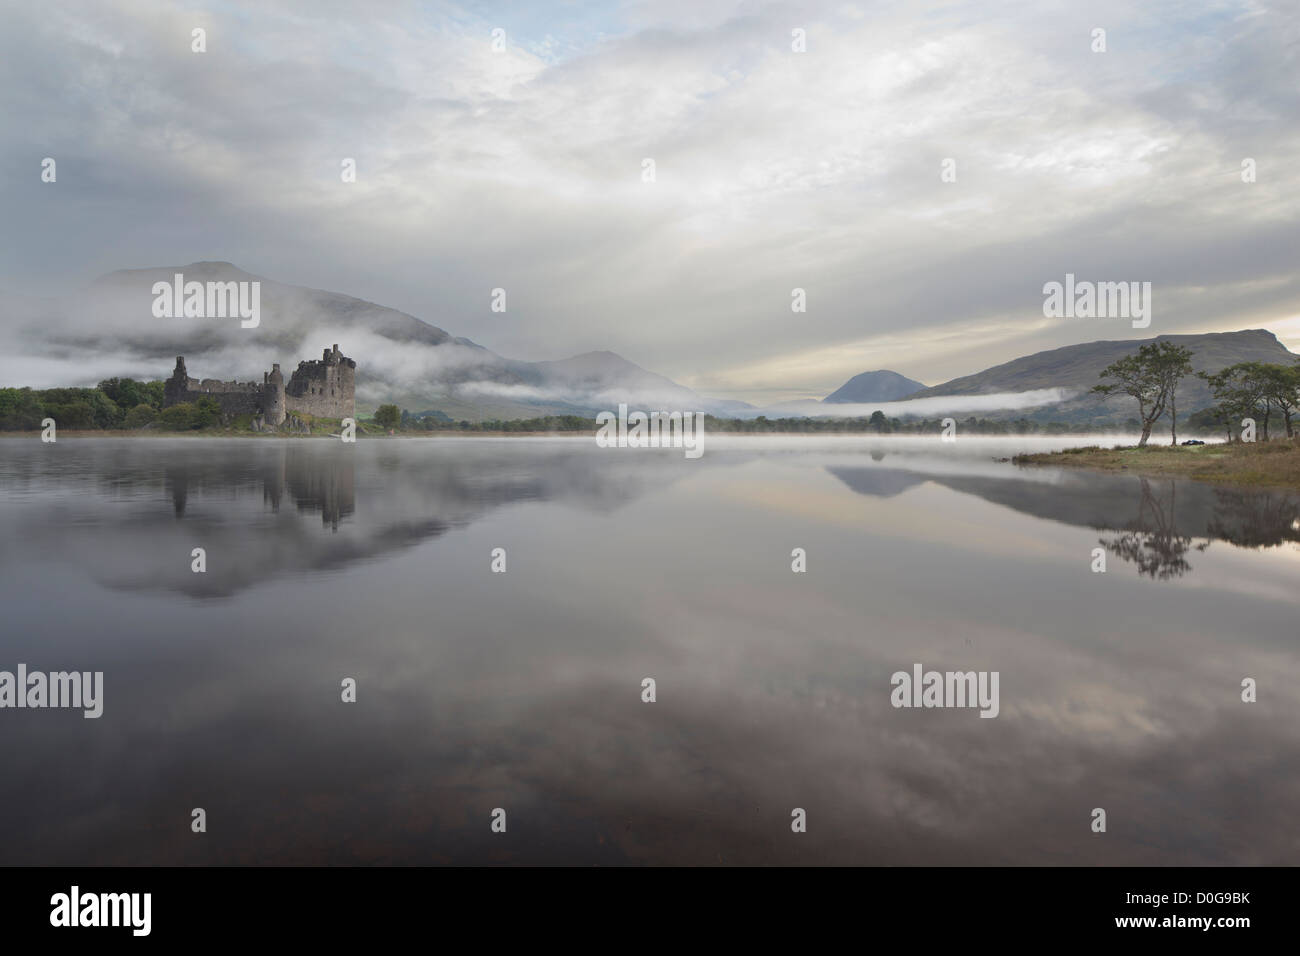 Kilchurn Castle and Loch Awe in damp misty weather conditions, Argyll, Highlands, Scotland, UK Stock Photo